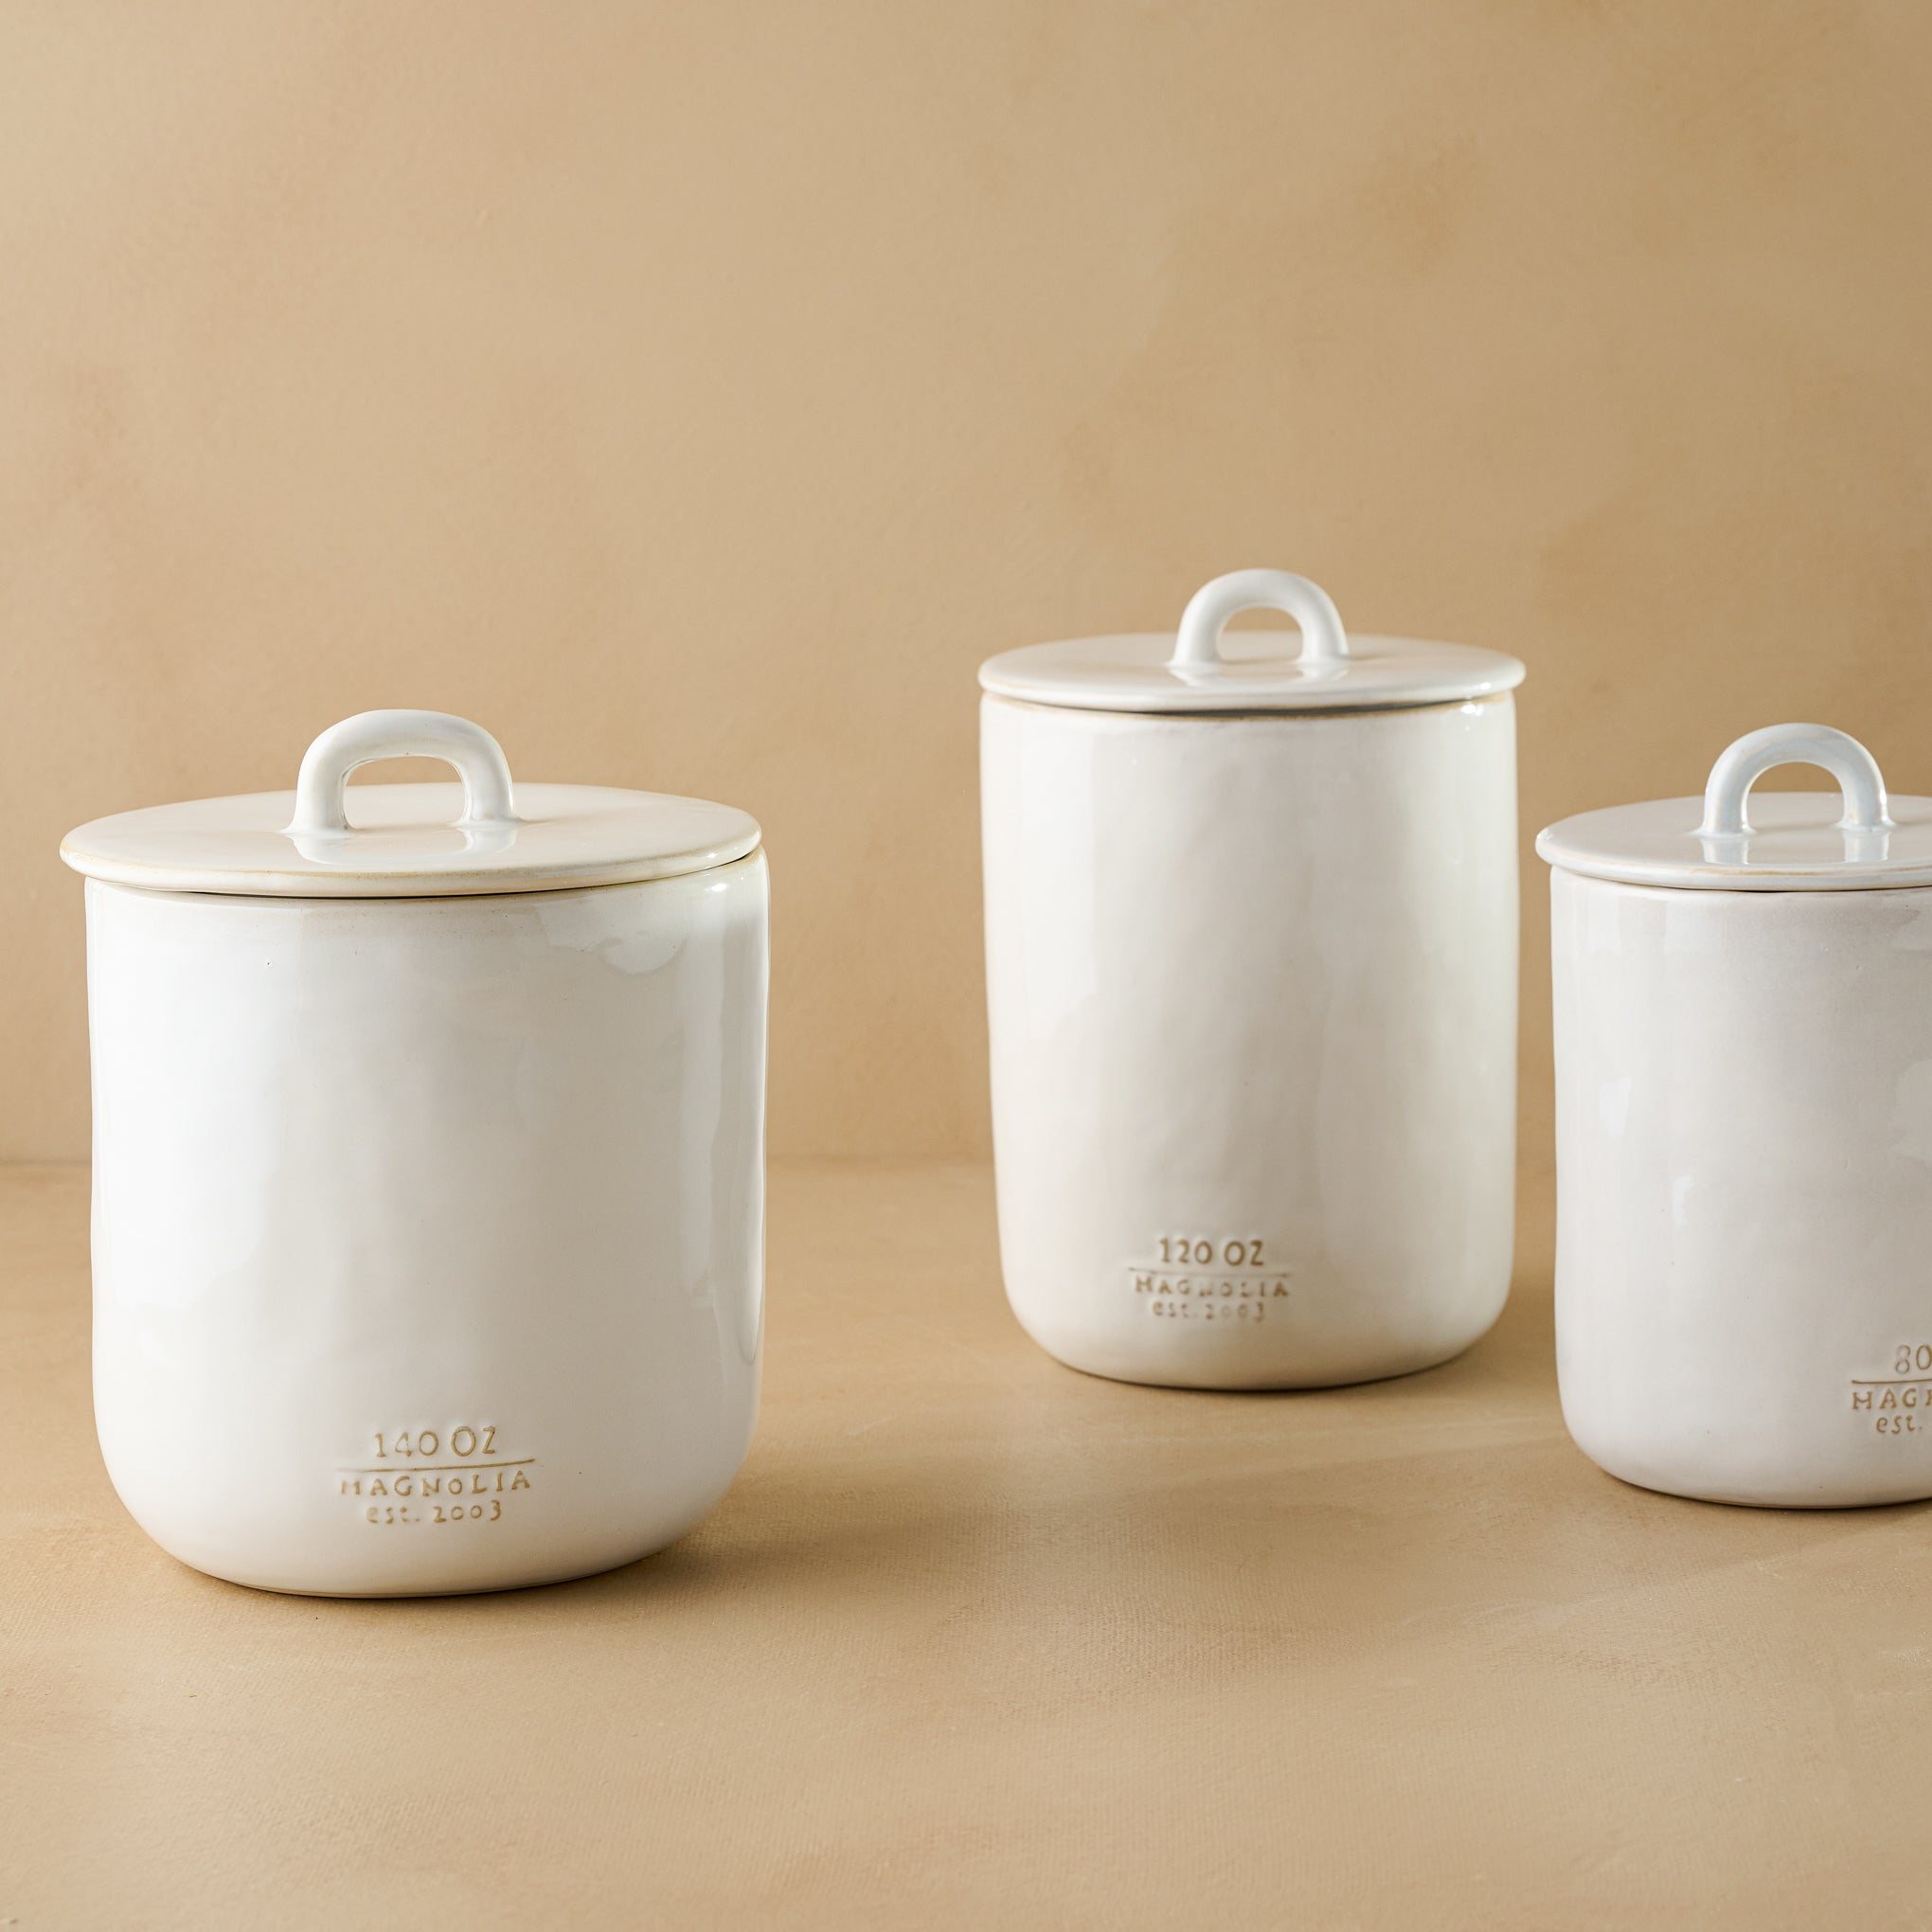 Mia Ceramic Canister in all three sizes Items range from $24.00 to $34.00